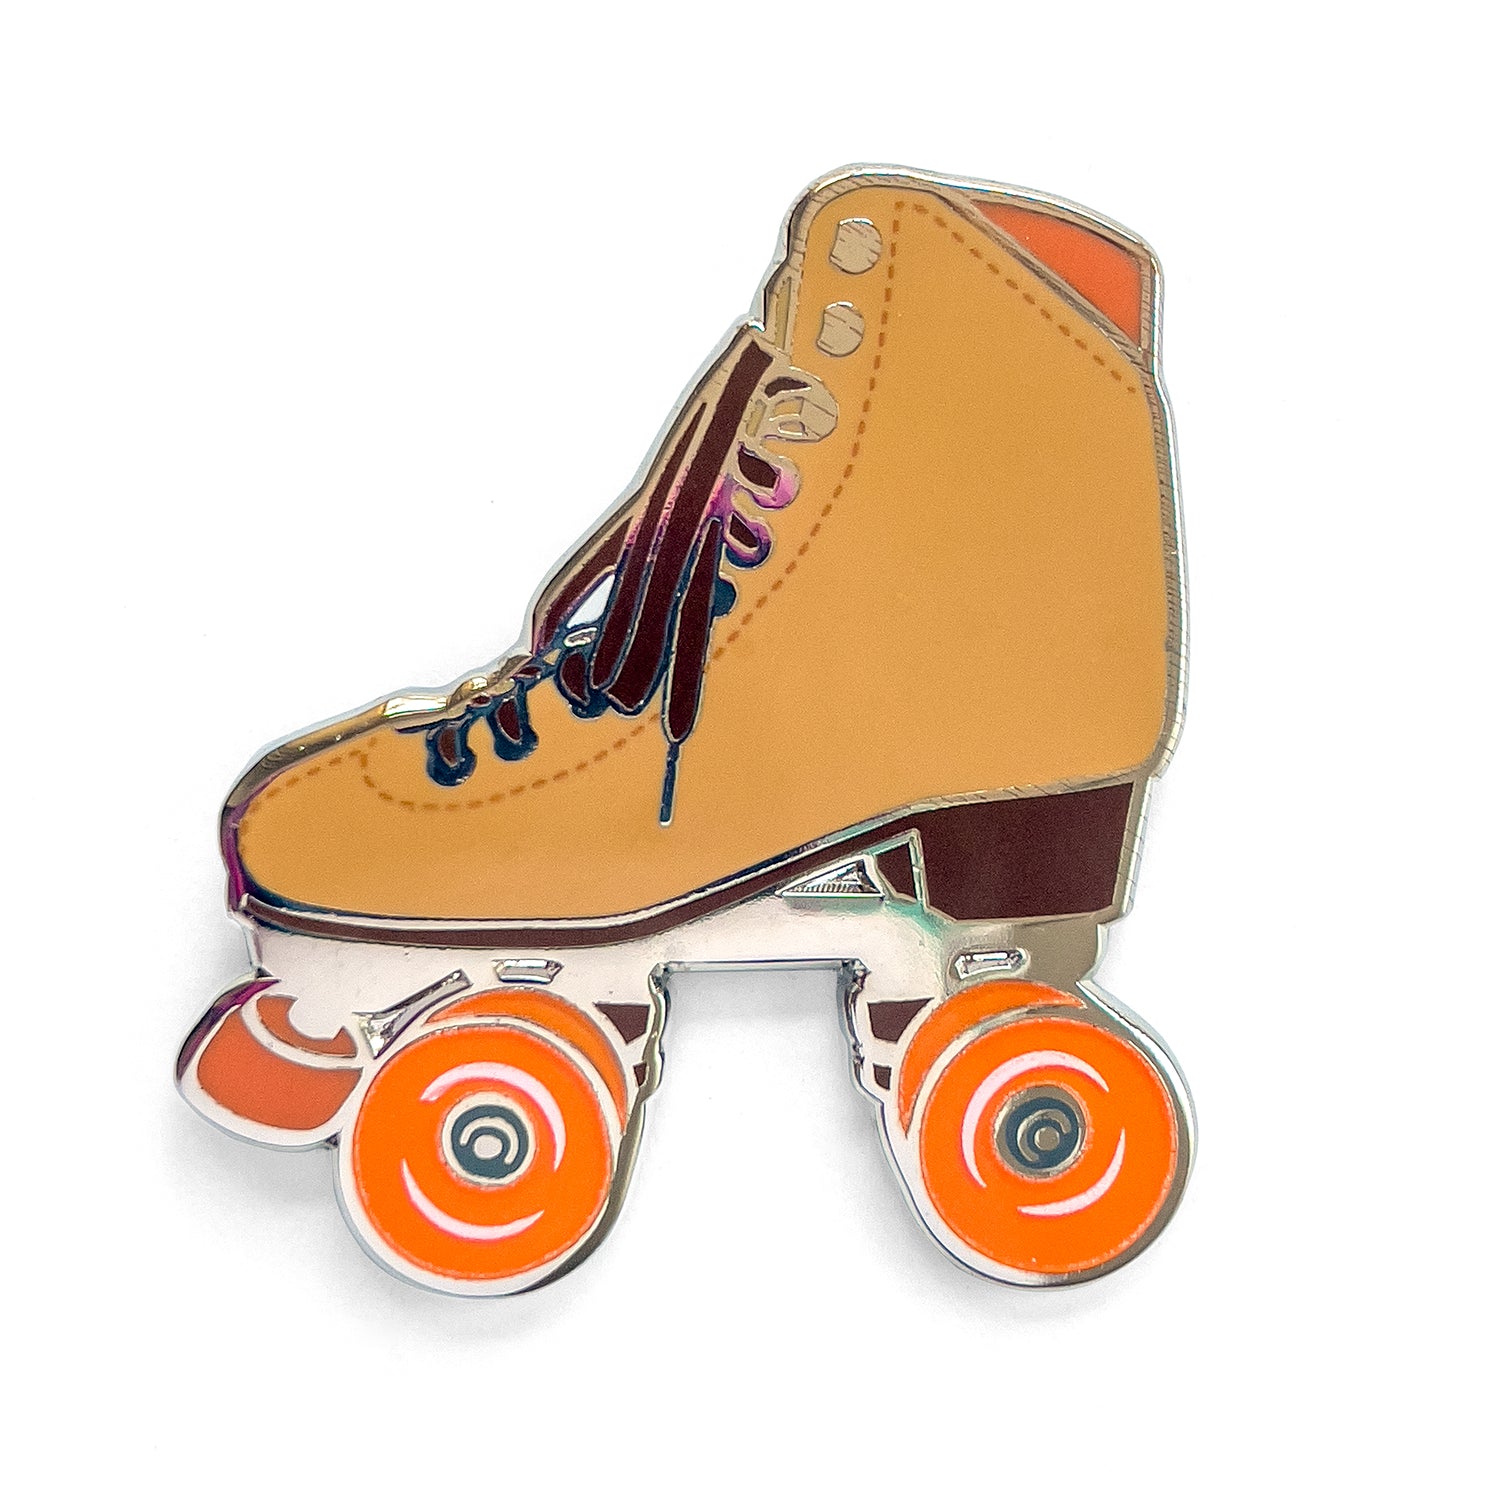 Brown roller skate pin with glow in the dark wheels